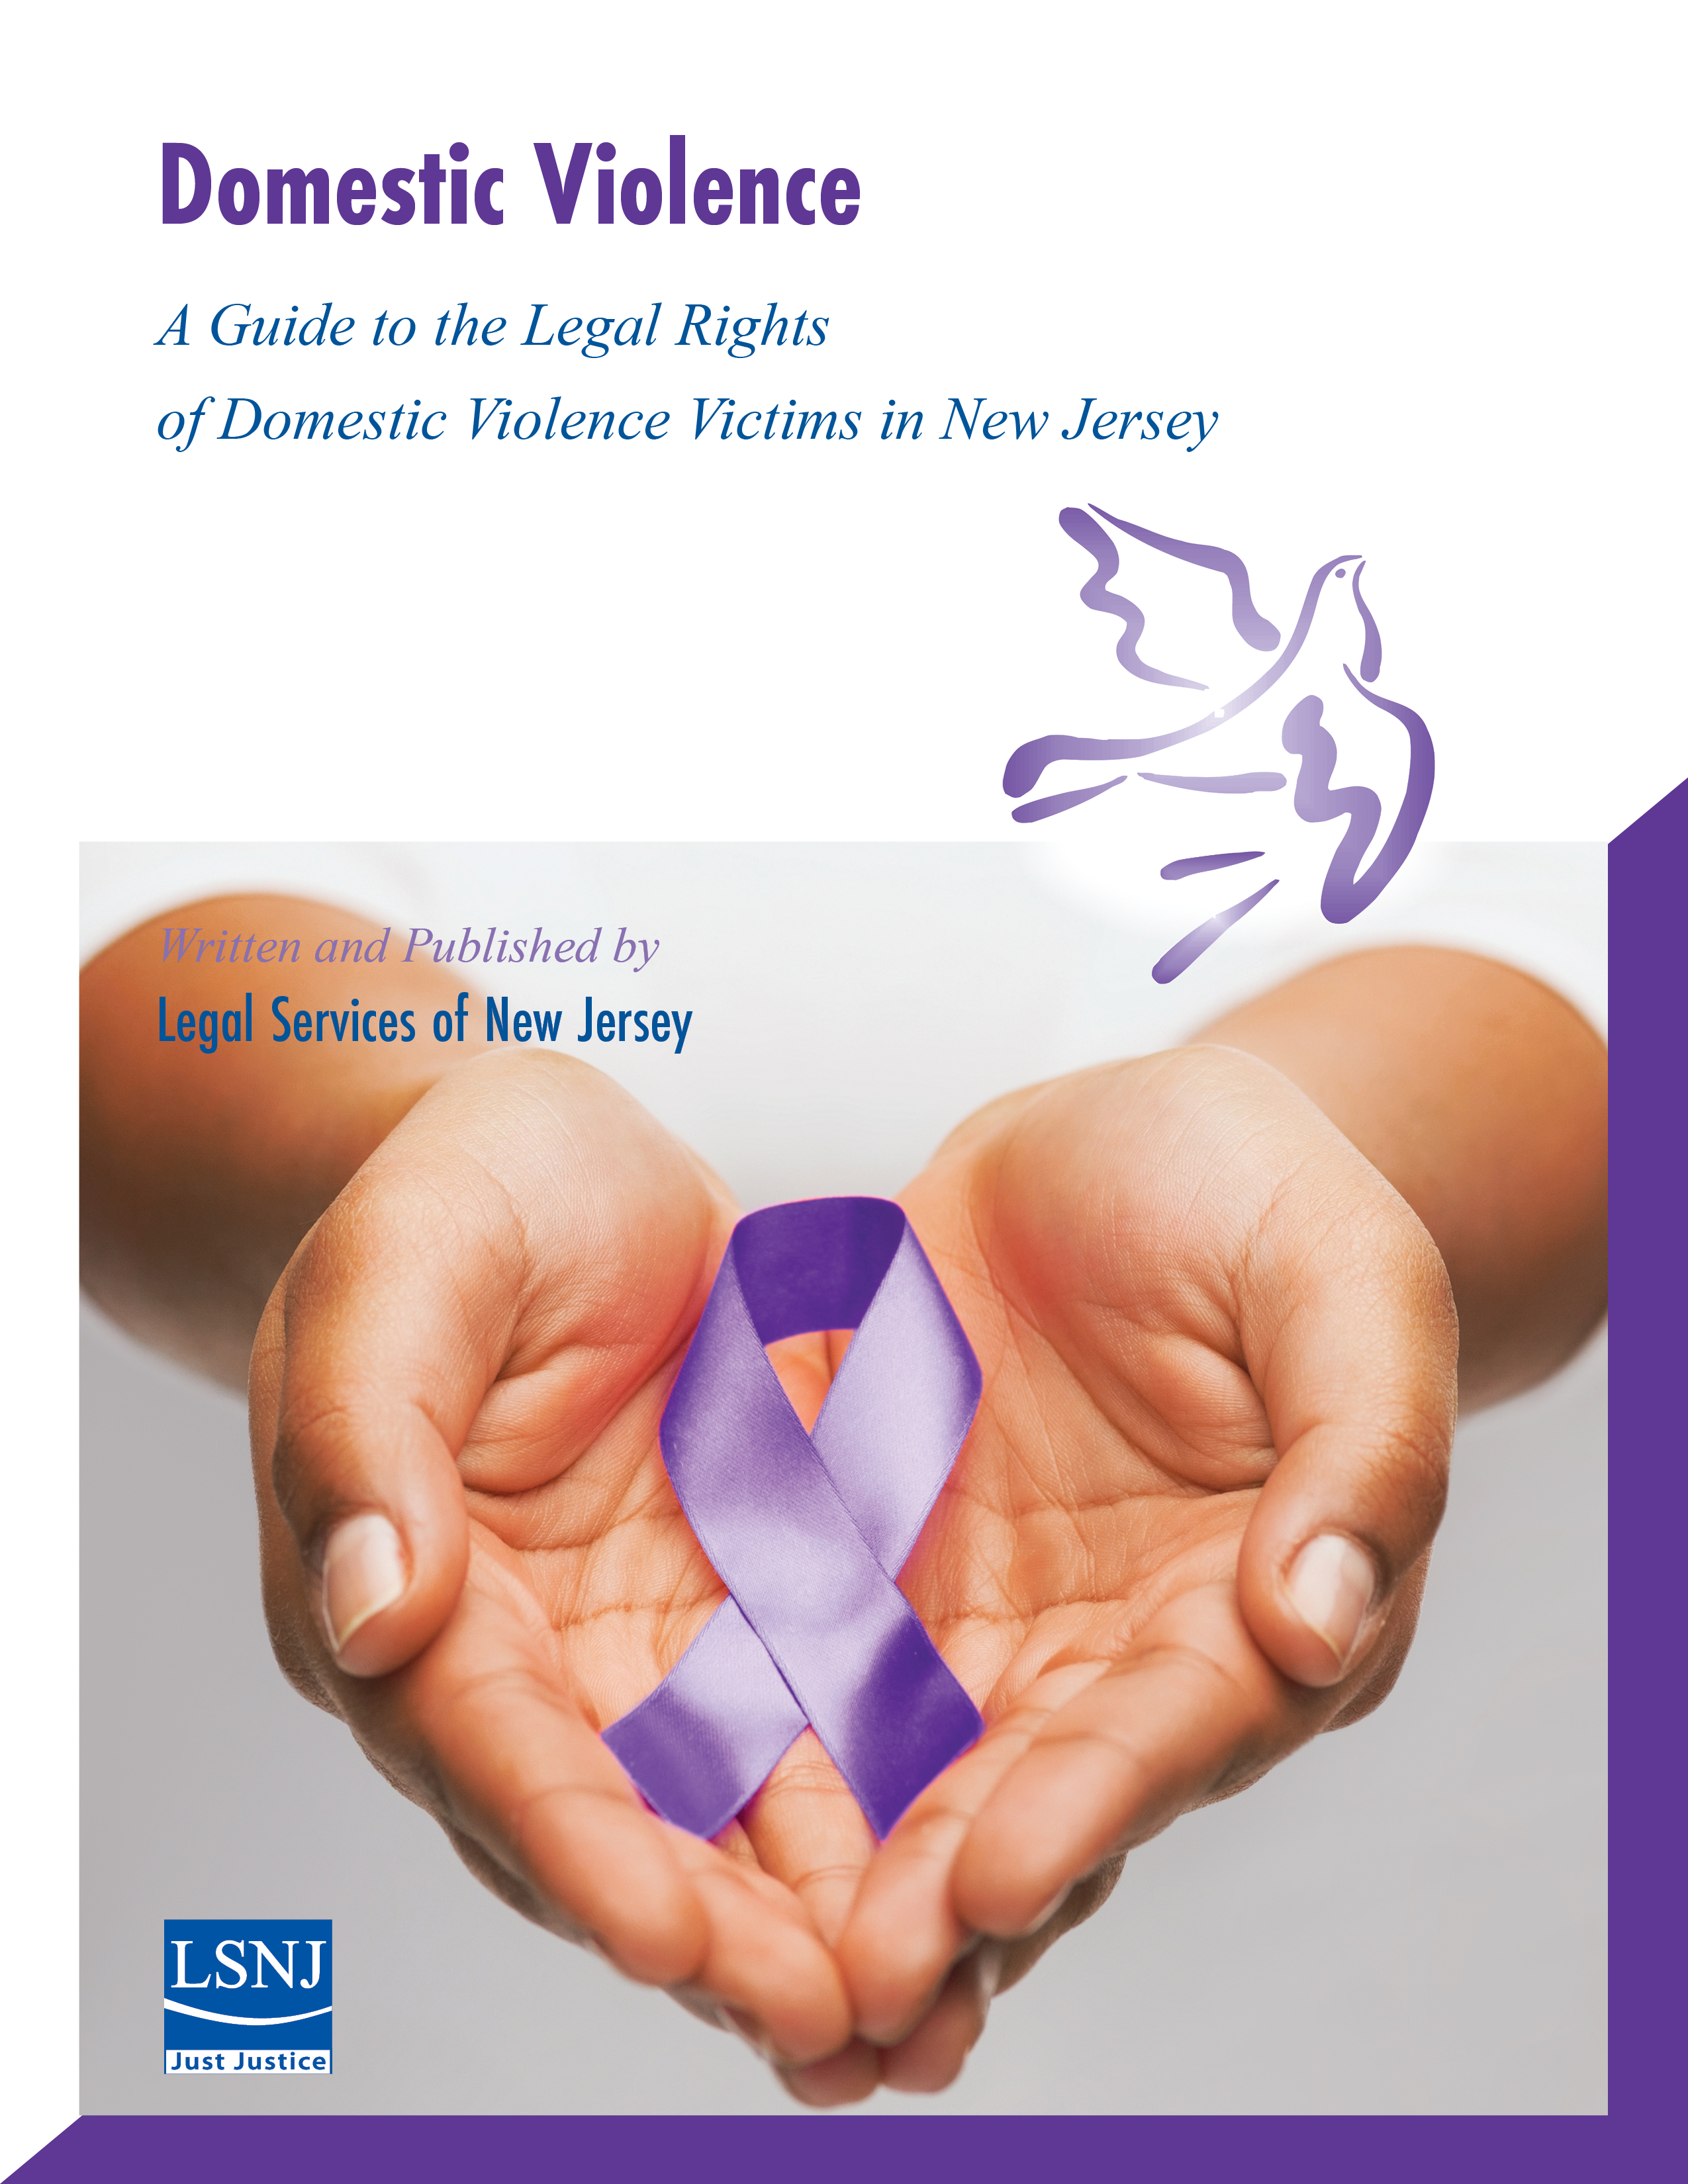 Domestic Violence: A Guide to the Legal Rights of Domestic Violence Victims in New Jersey